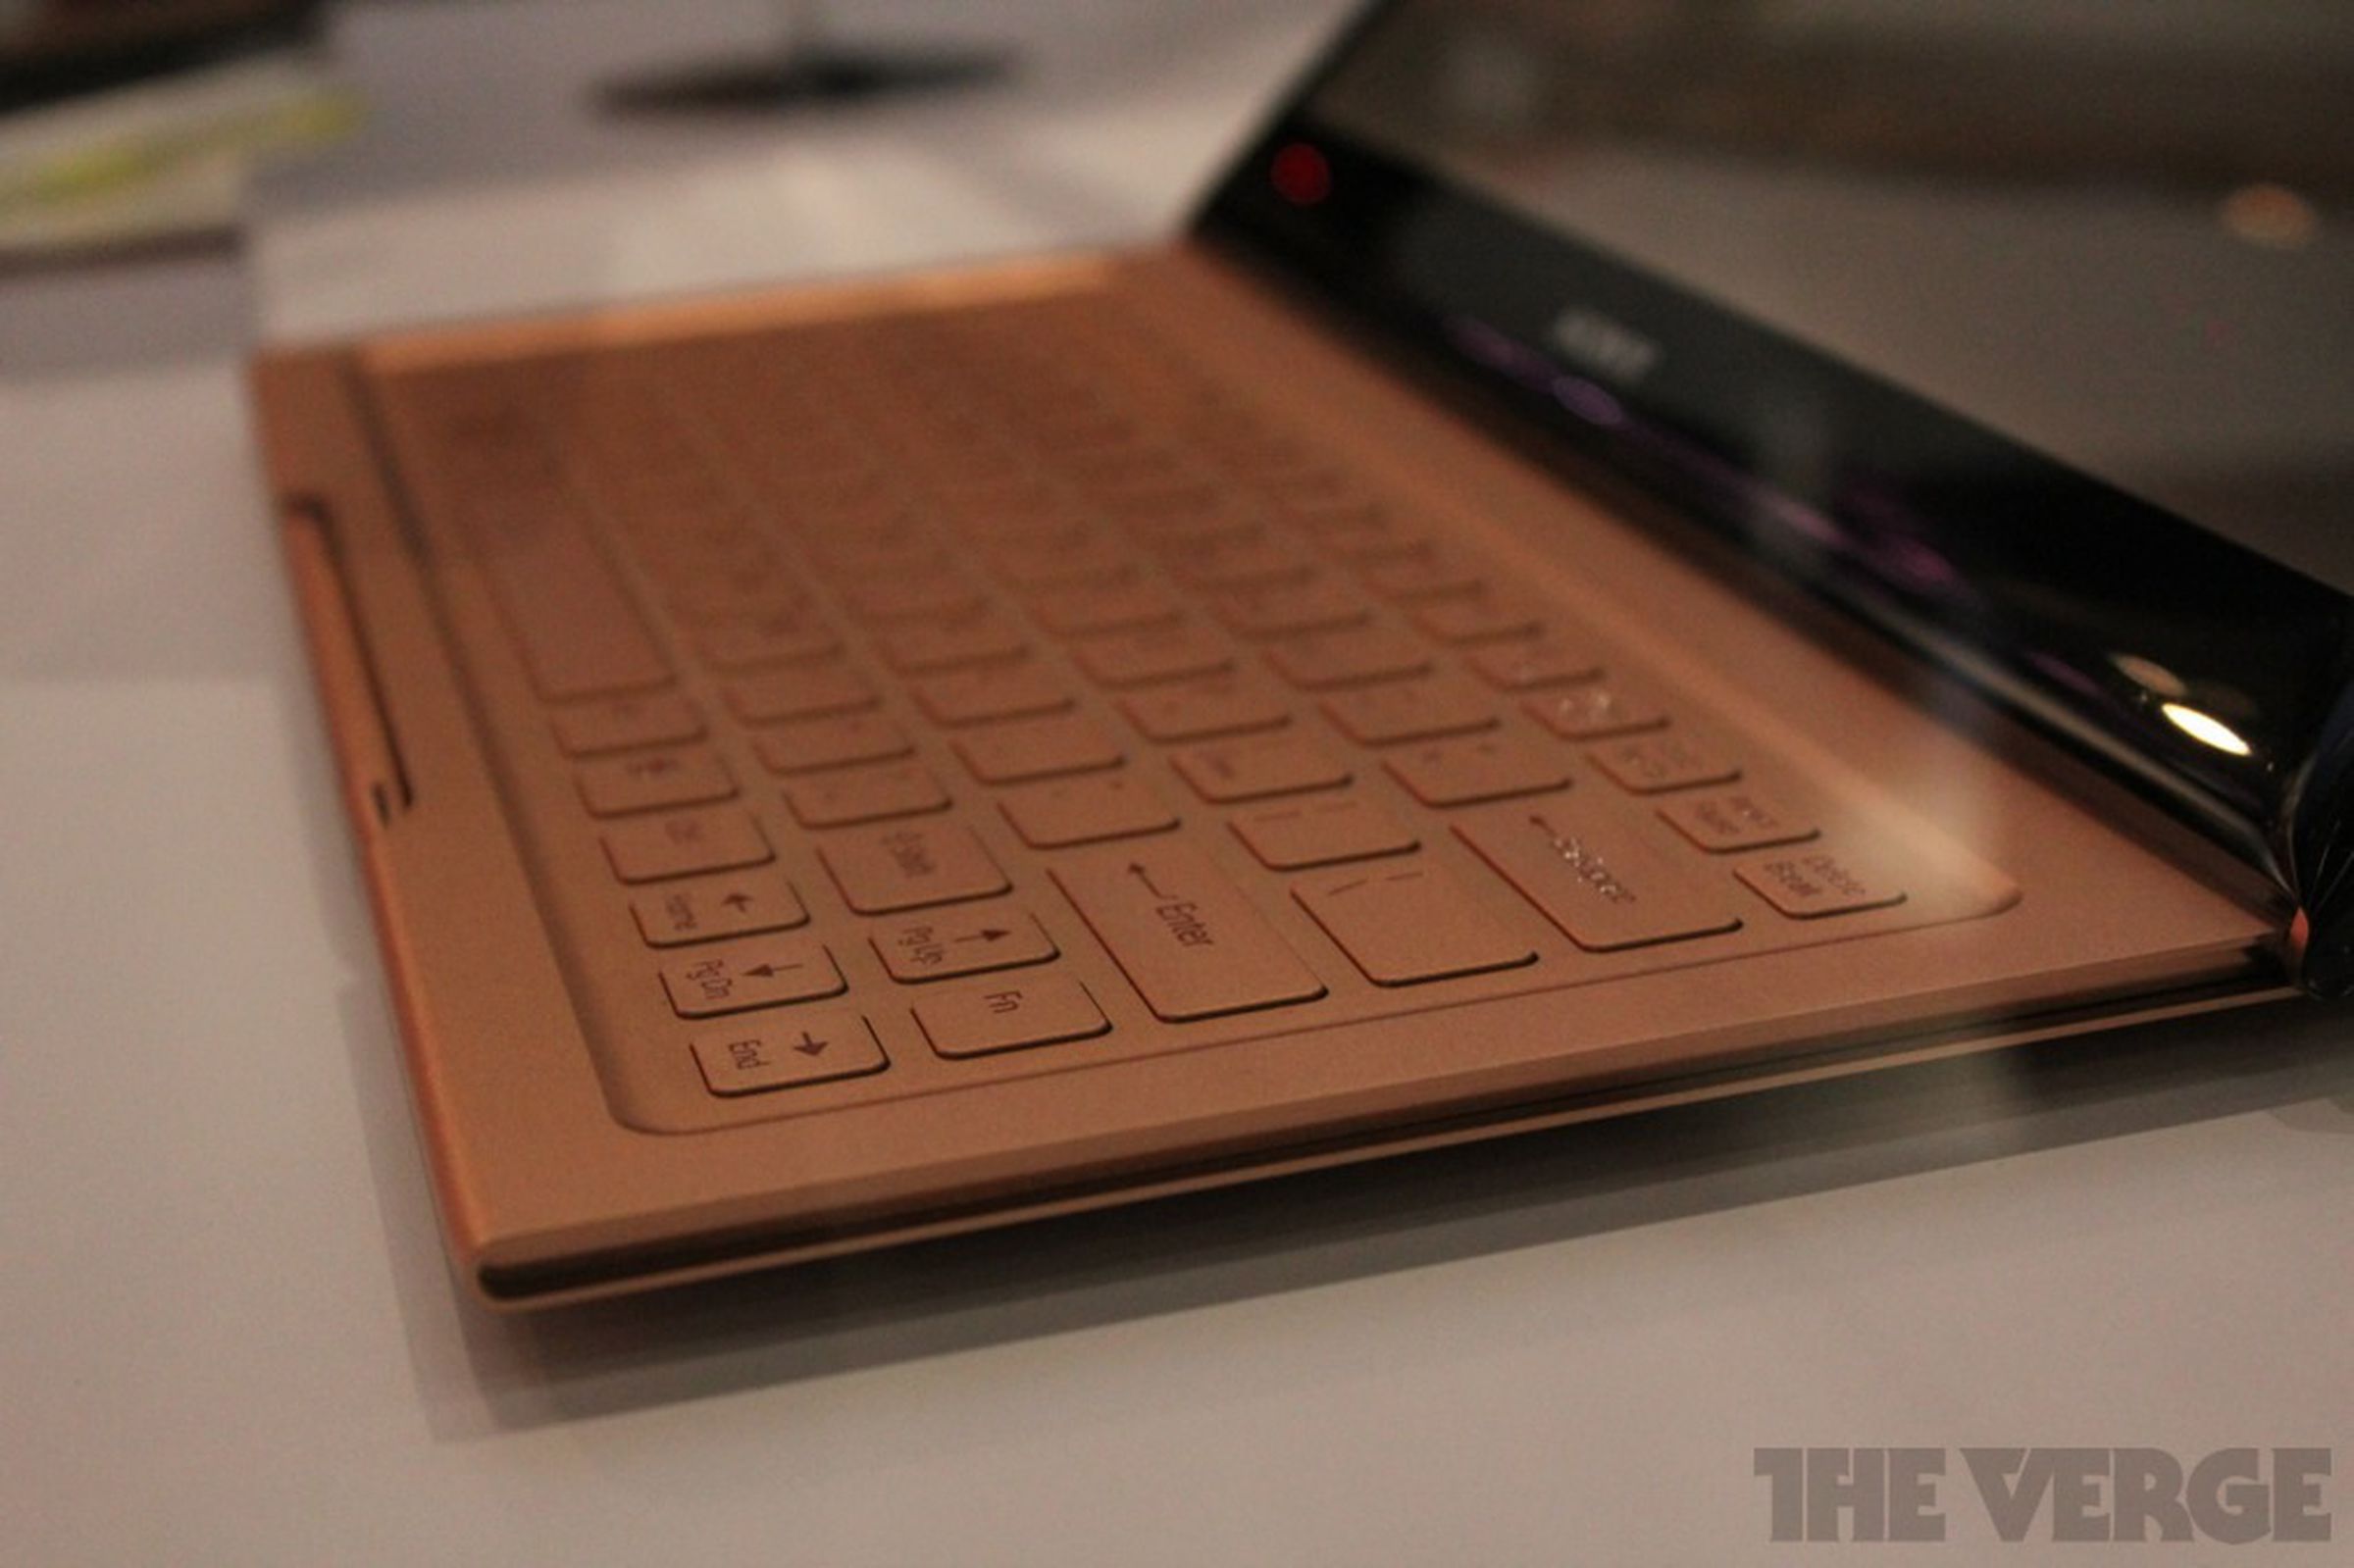 Sony VAIO tablet with sliding keyboard prototype 